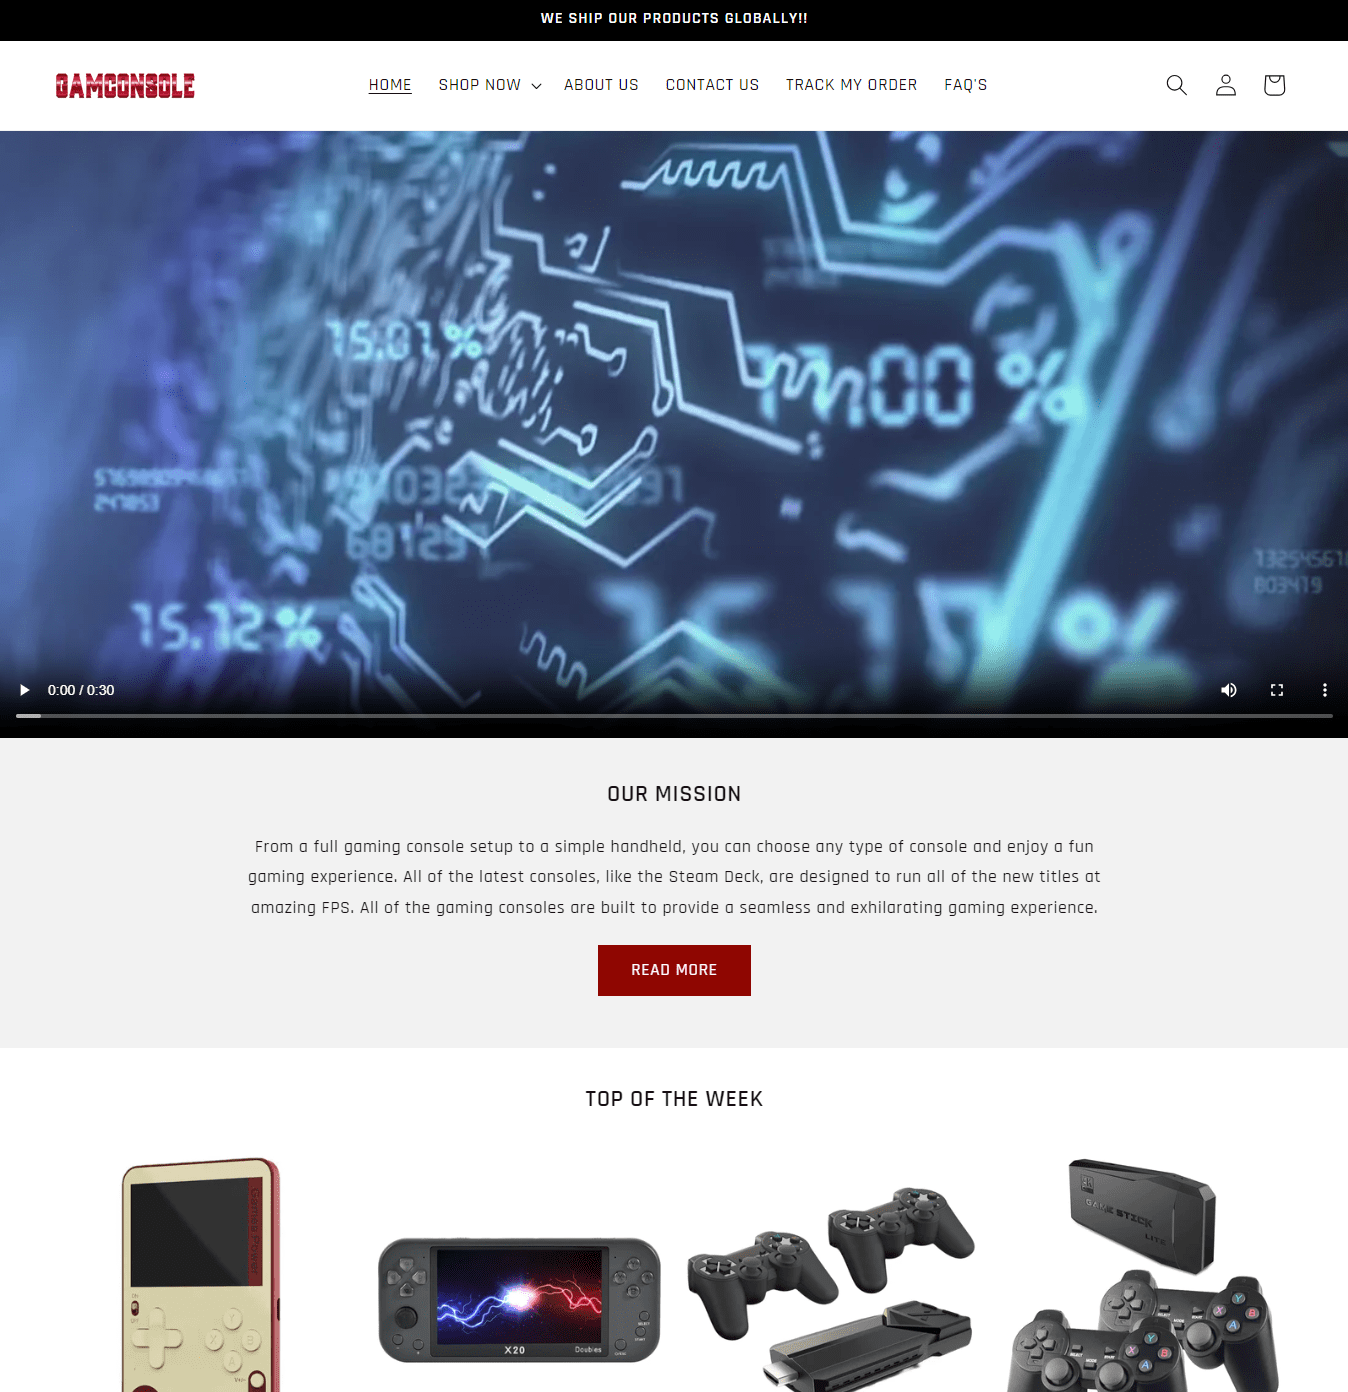 Gamconsole ( Handheld Game Console Store)